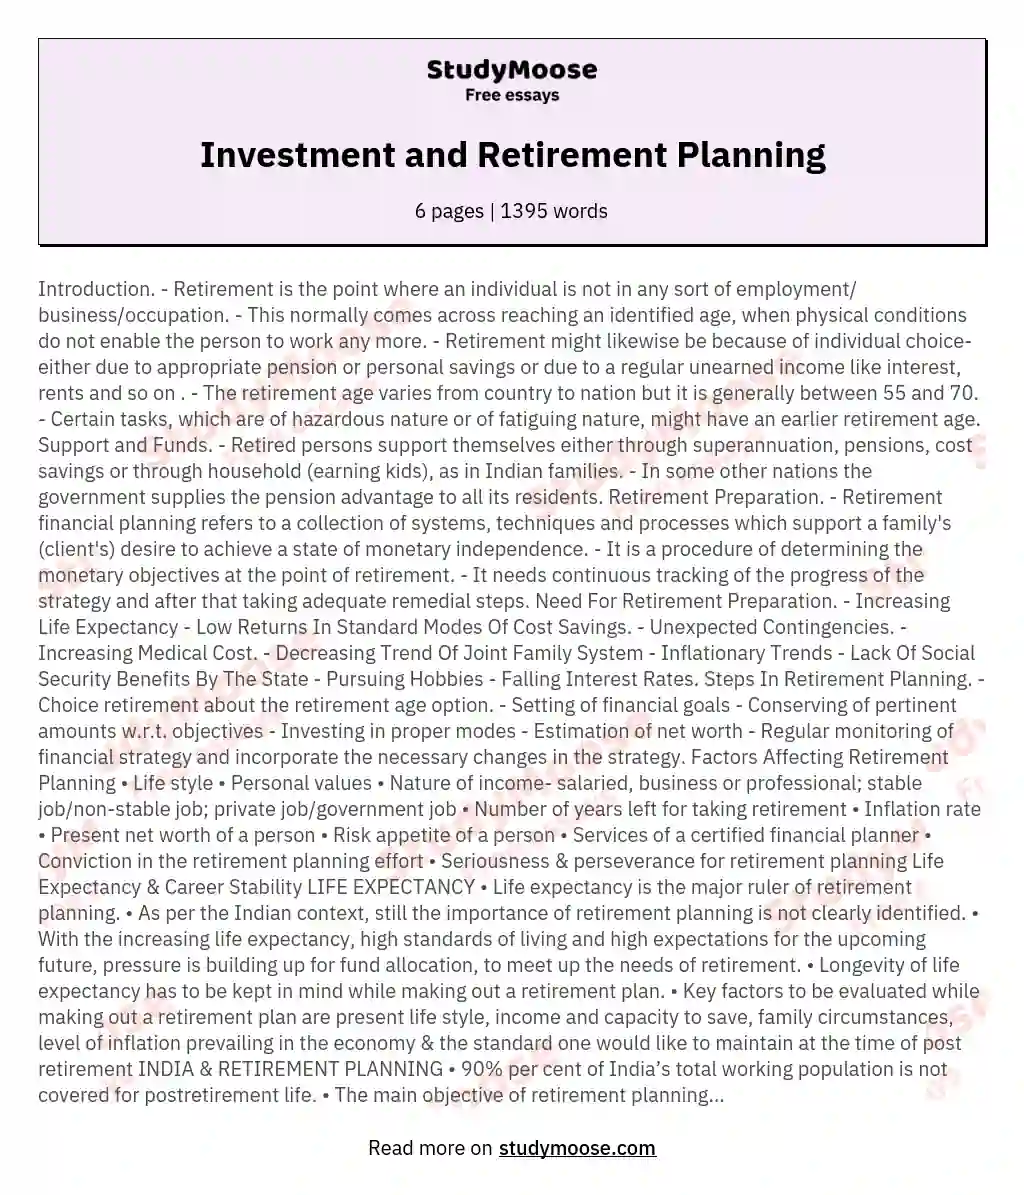 Investment and Retirement Planning